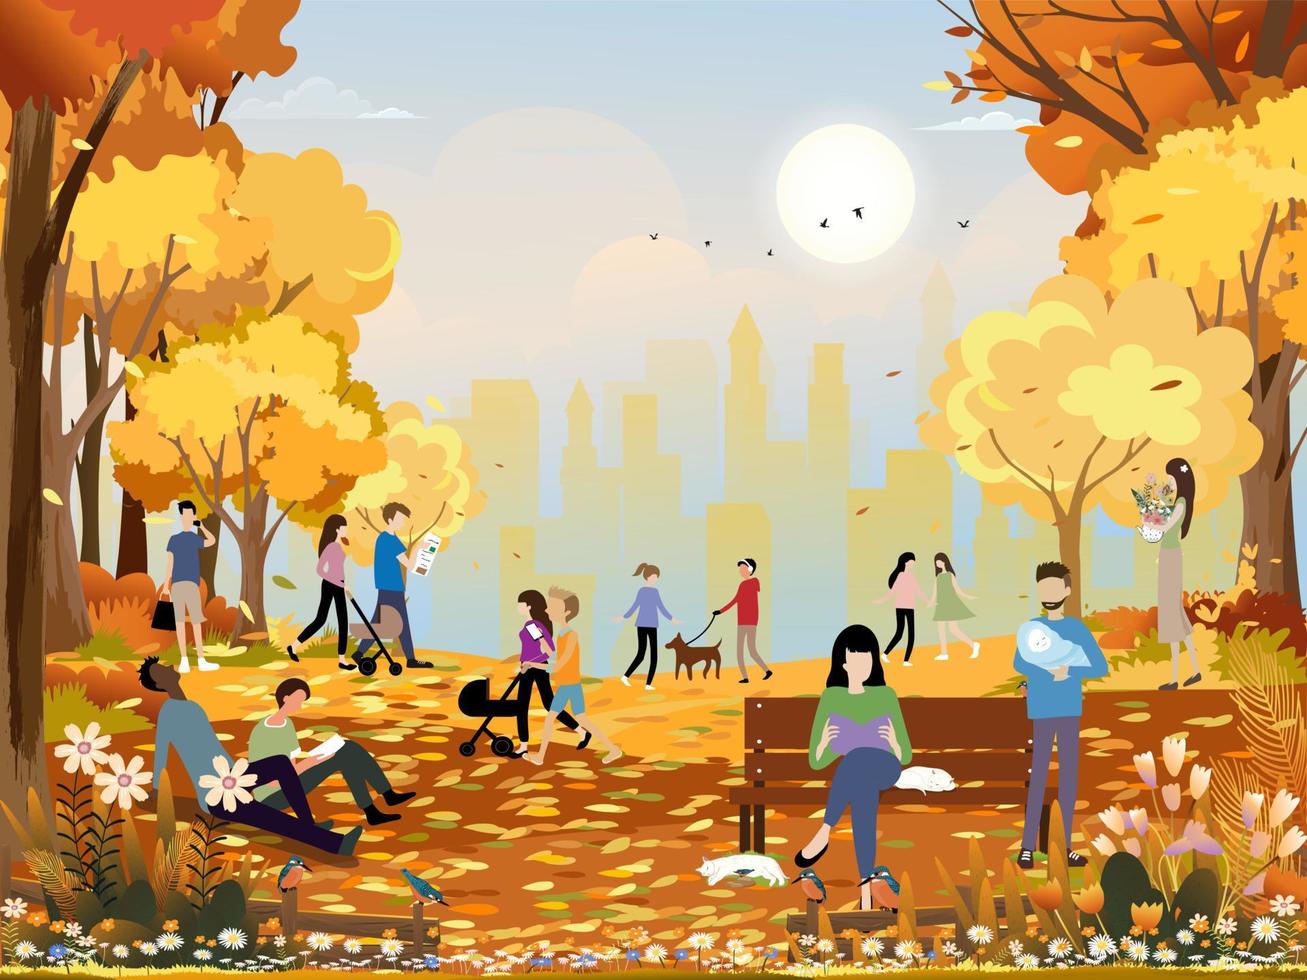 Autumn landscape in city park with happy people having fun, family walking the dog,boy talking on phone, man reading news paper and a girl sitting on bench having coffee reading book in orange foliage vector